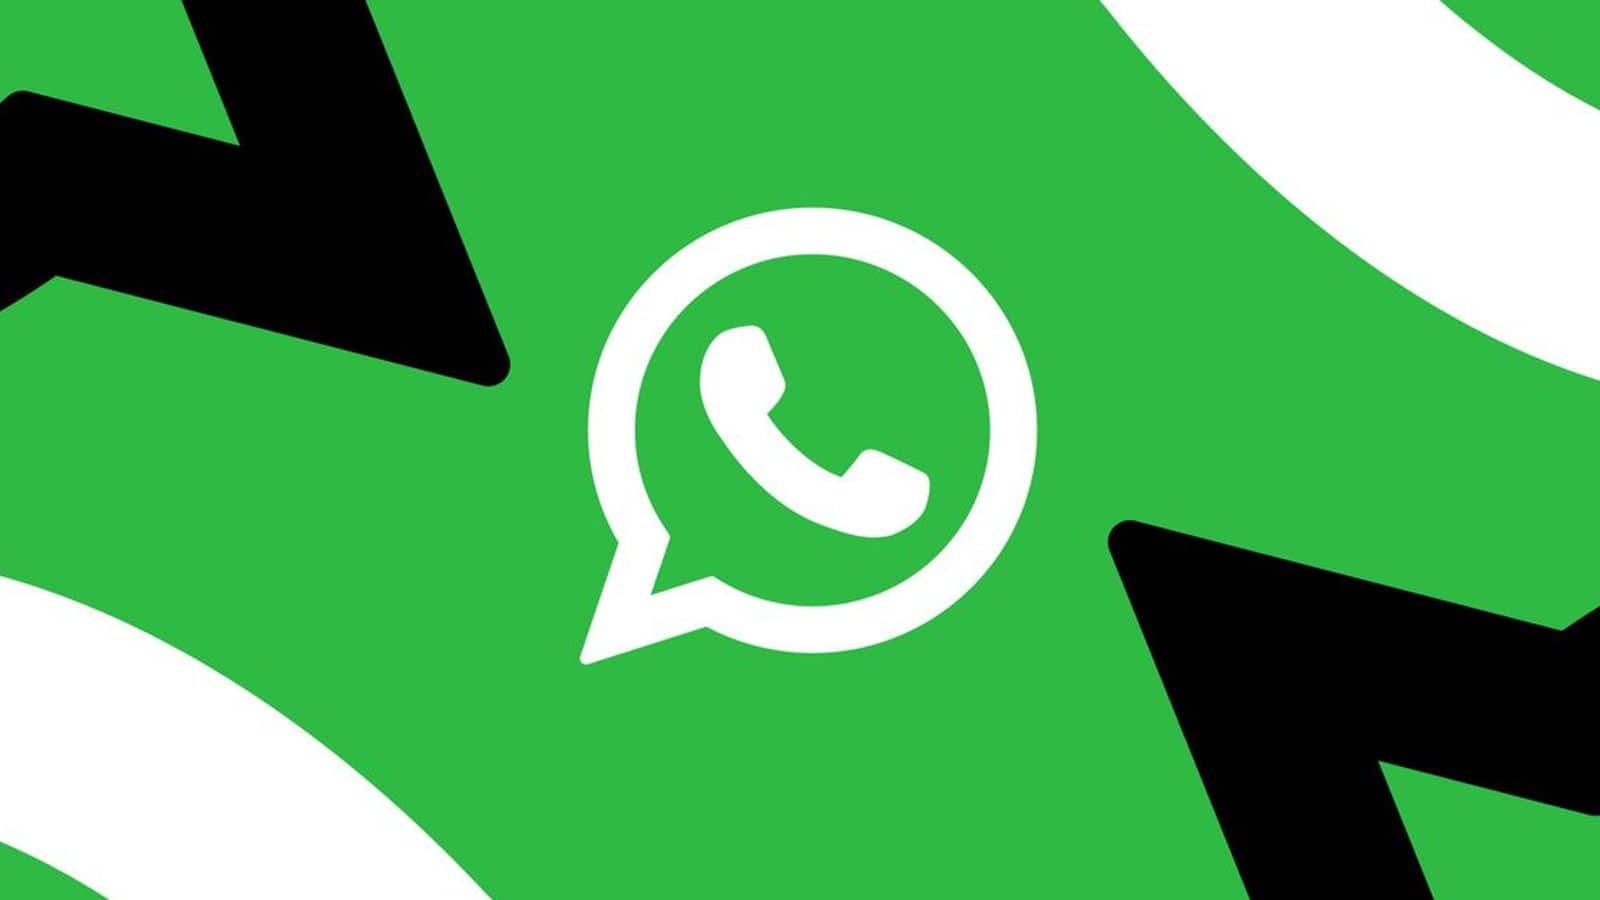 You can now plan group events on WhatsApp: Here's how